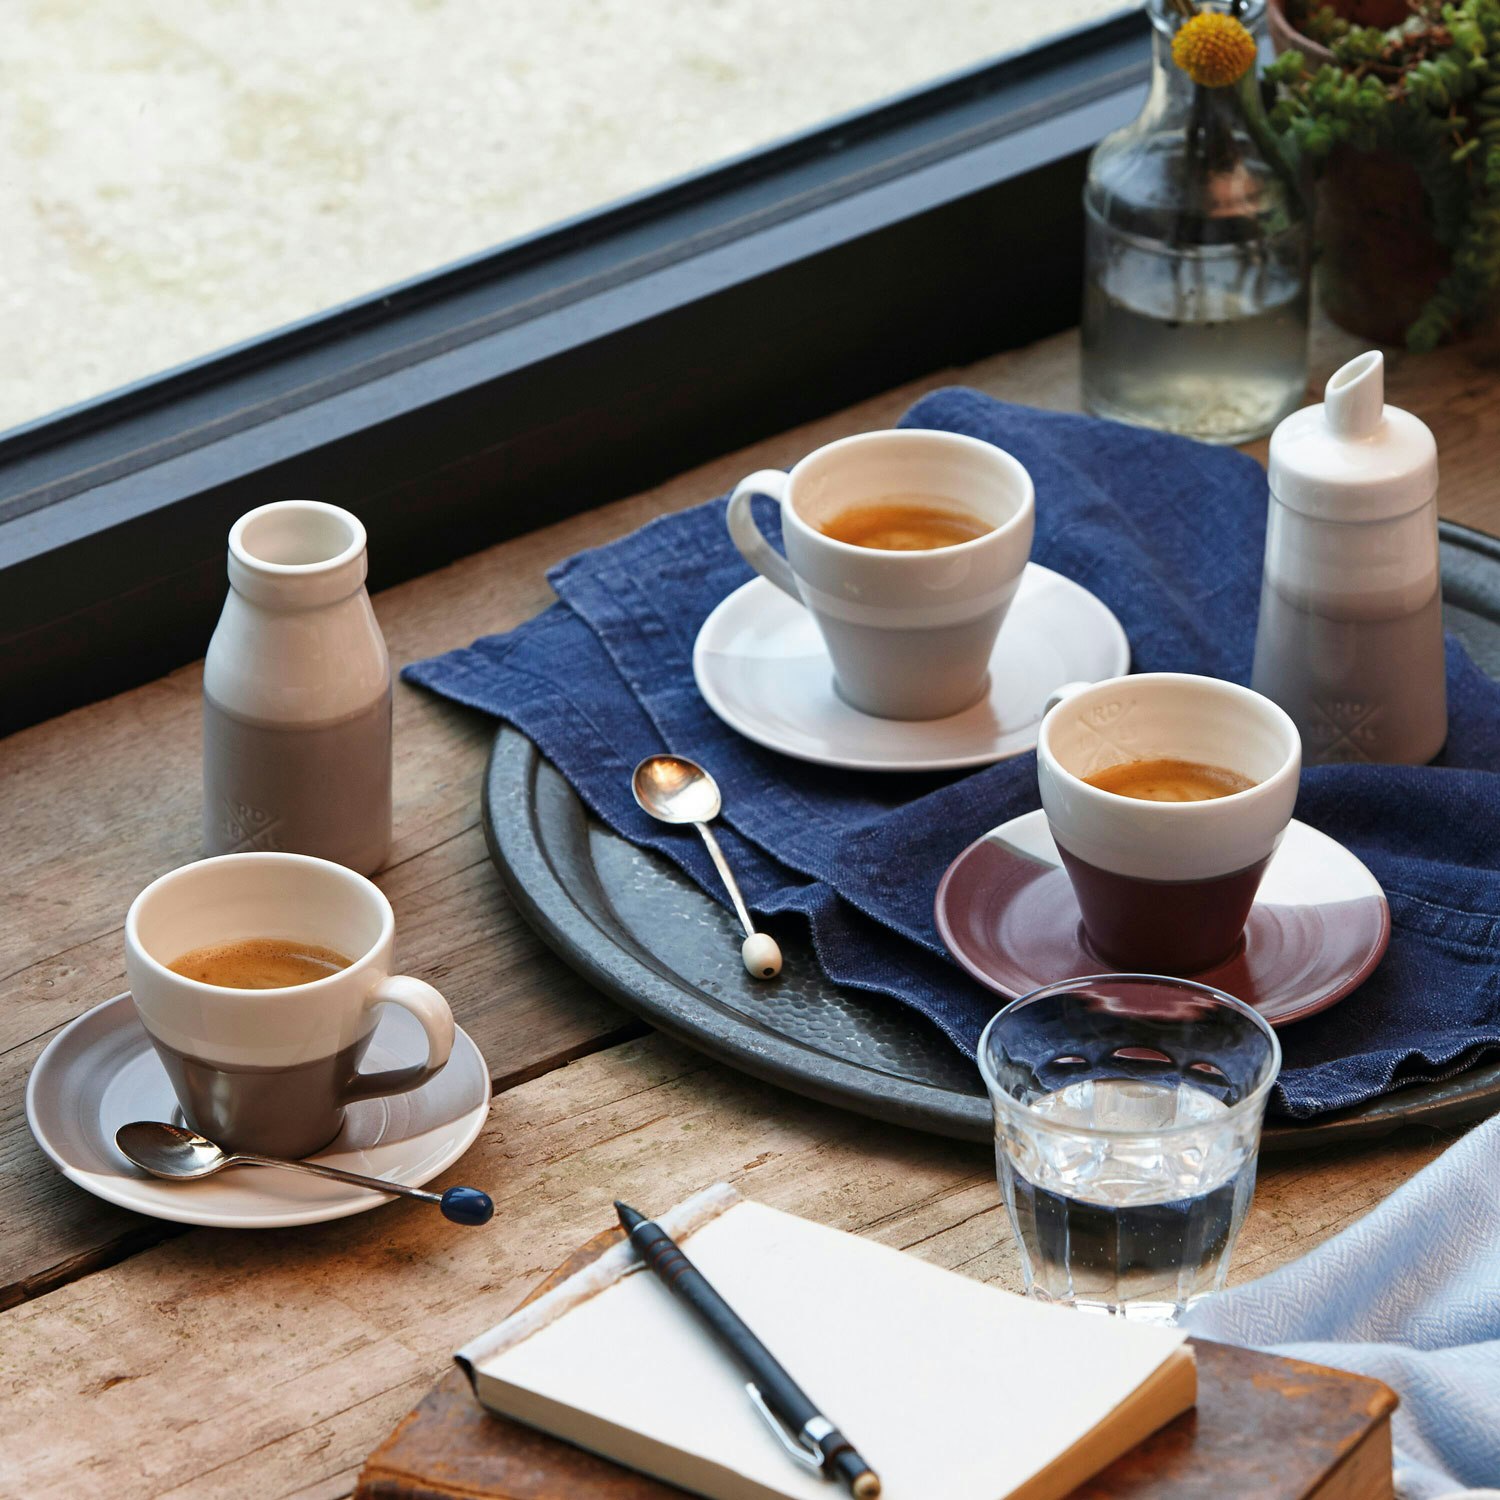 https://royaldesign.com/image/2/royal-doulton-coffee-studio-espresso-cups-and-saucers-4-pack-1